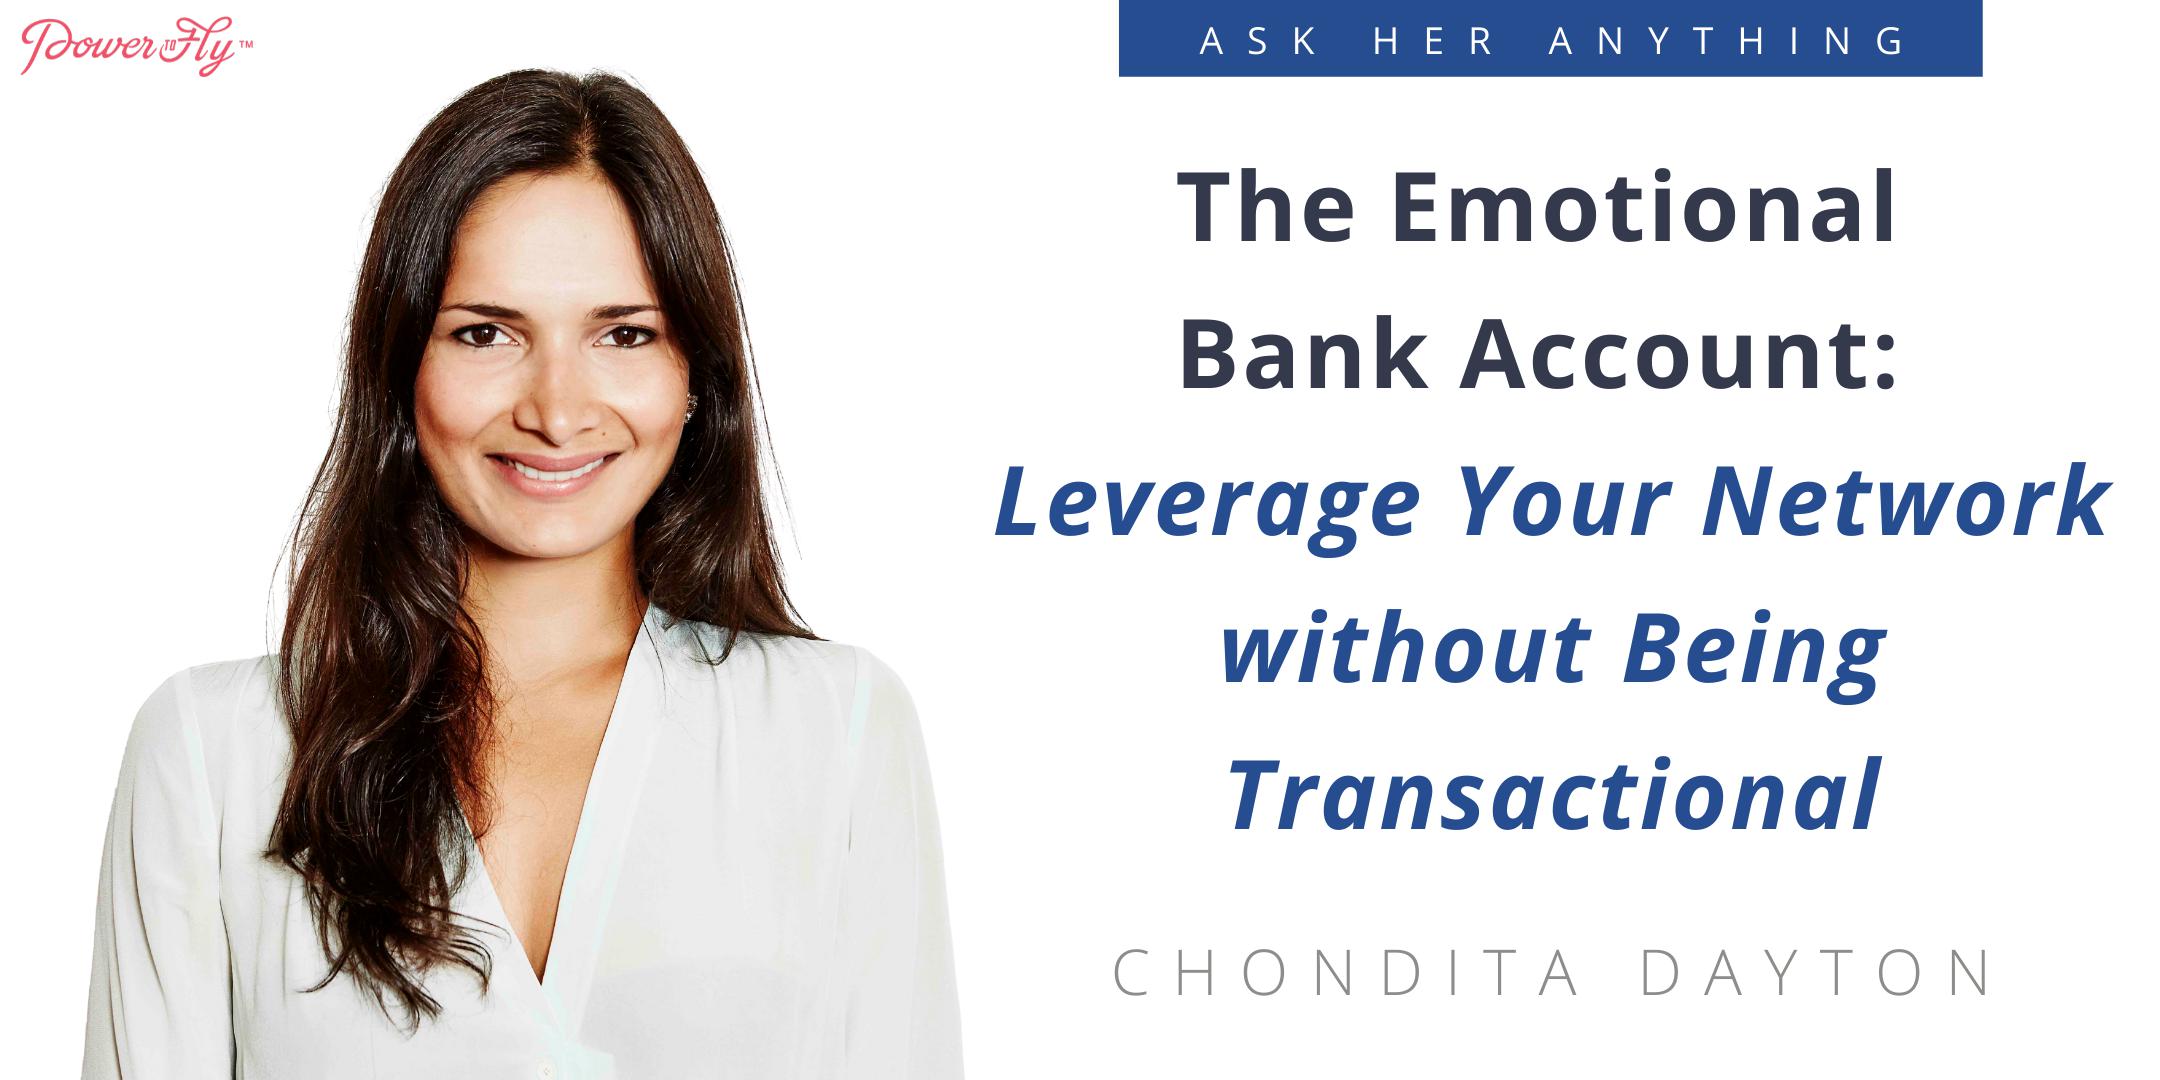 The Emotional Bank Account: Leverage Your Network without Being Transactional